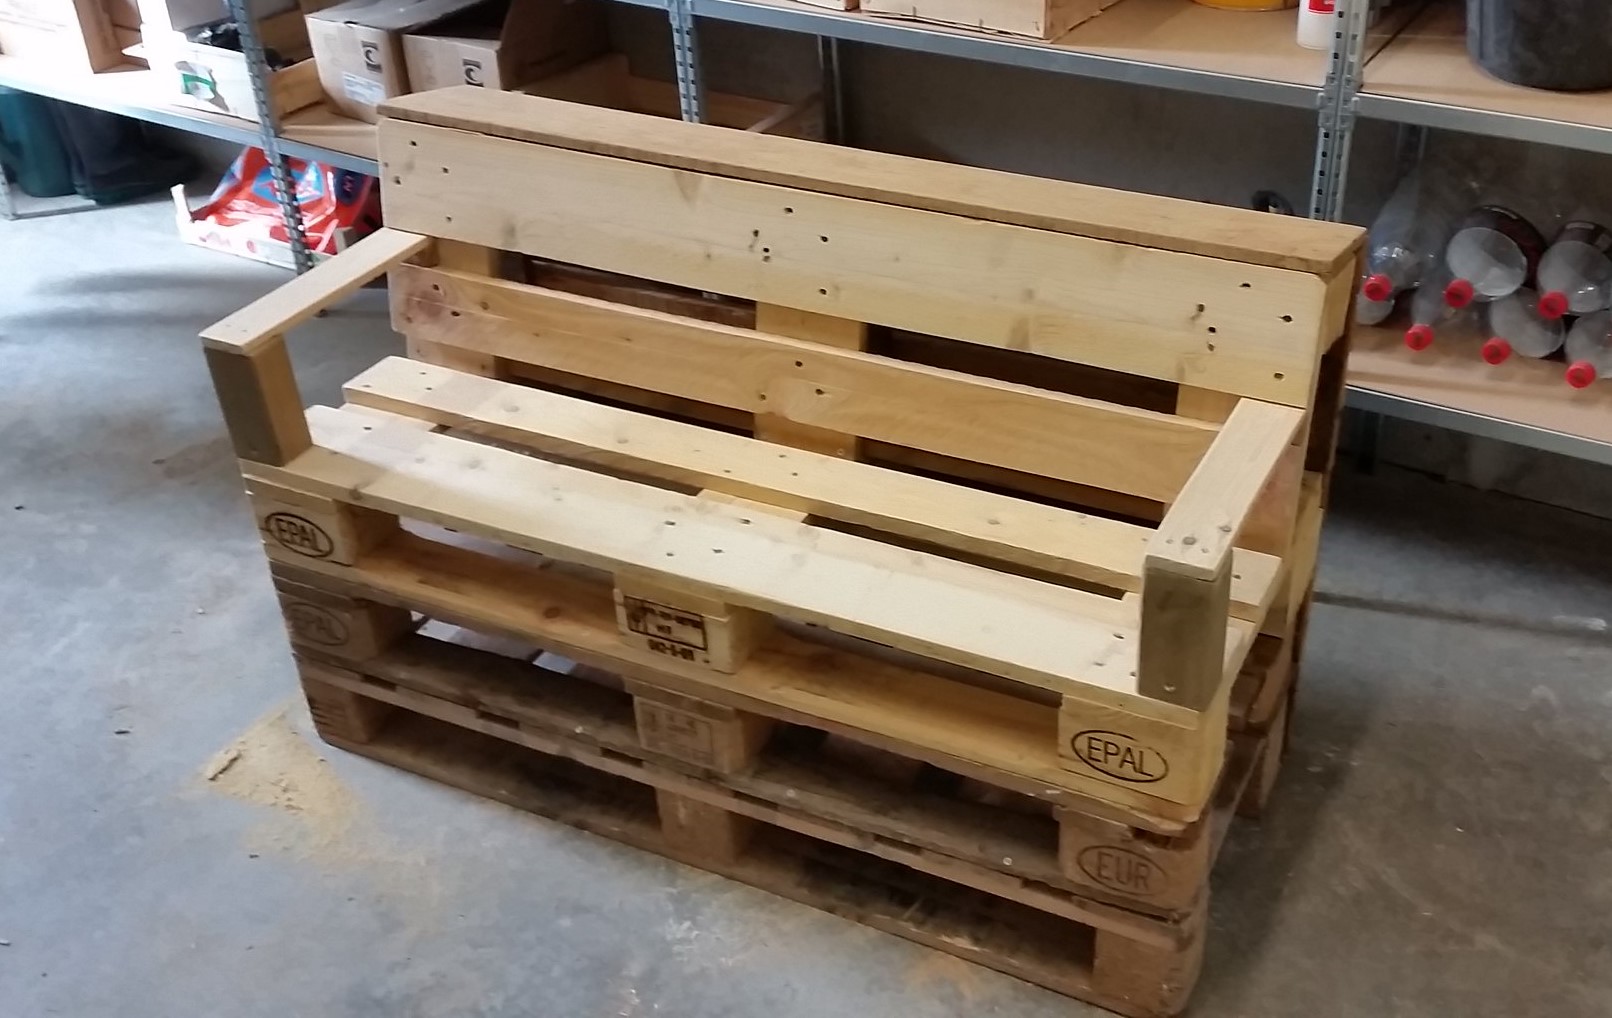 DIY pallet furniture – why are they so popular?